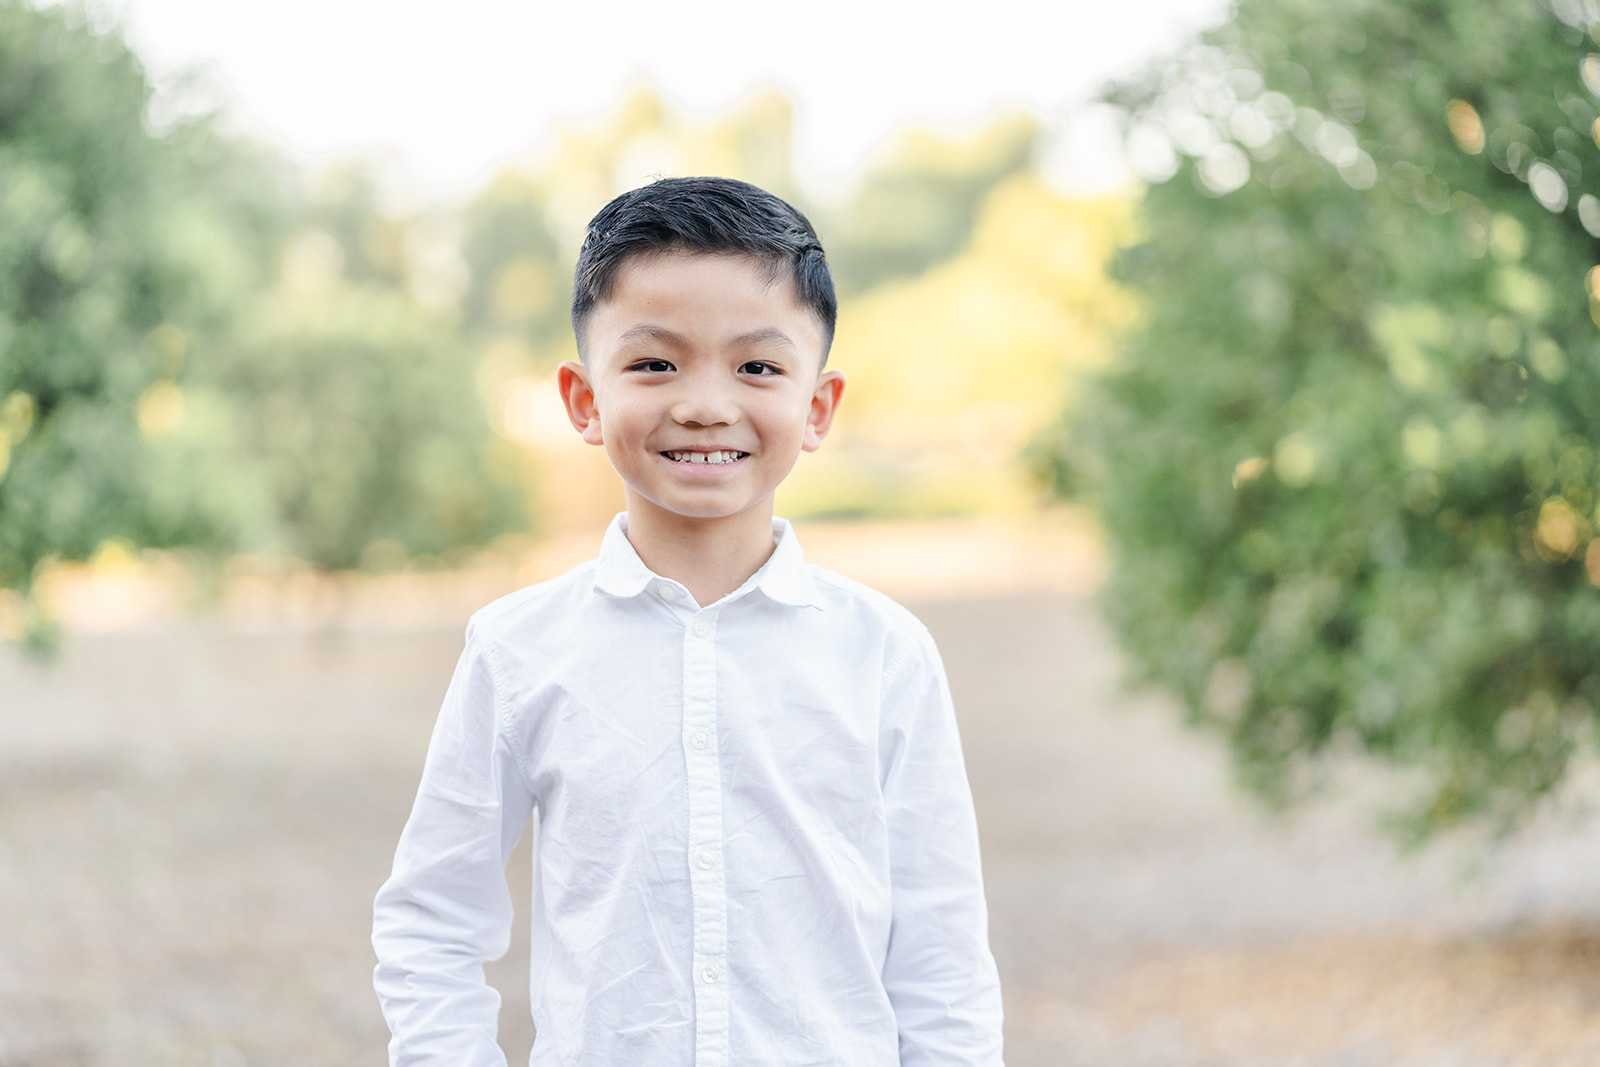 A young boy smiles while wearing a white button down in an orange grove before visiting a Newport Beach Orthodontist